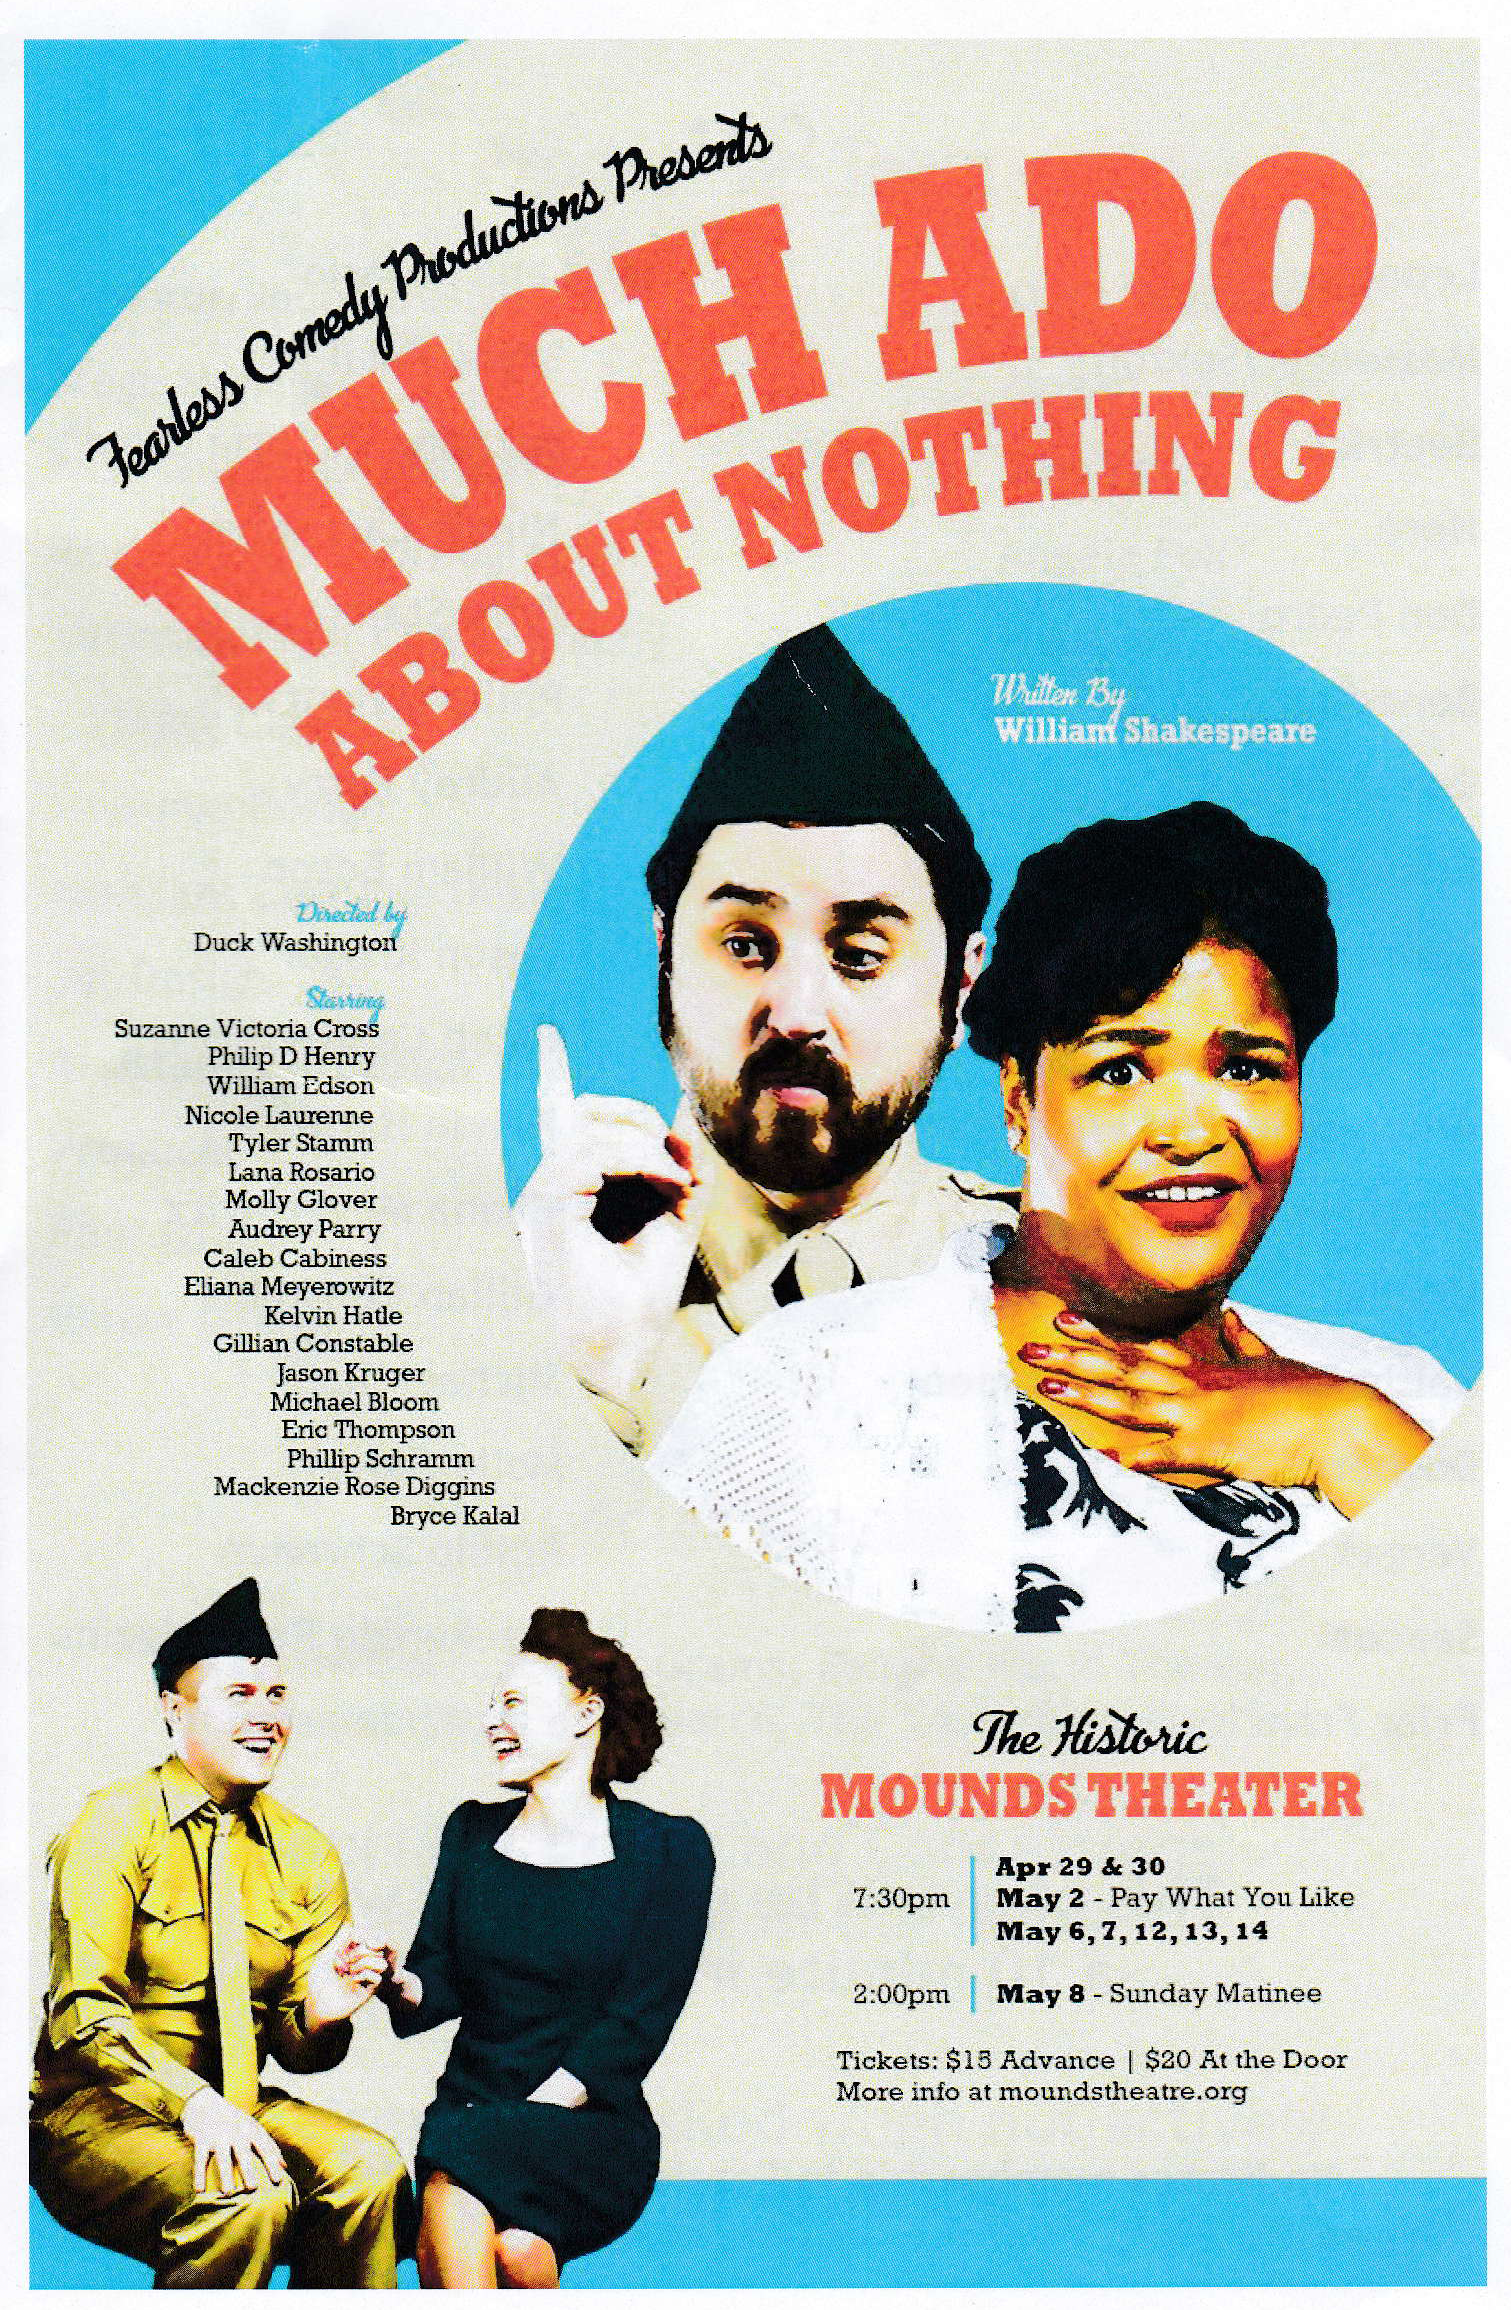 Much Ado About Nothing Poster  Theatre Artwork & Promotional